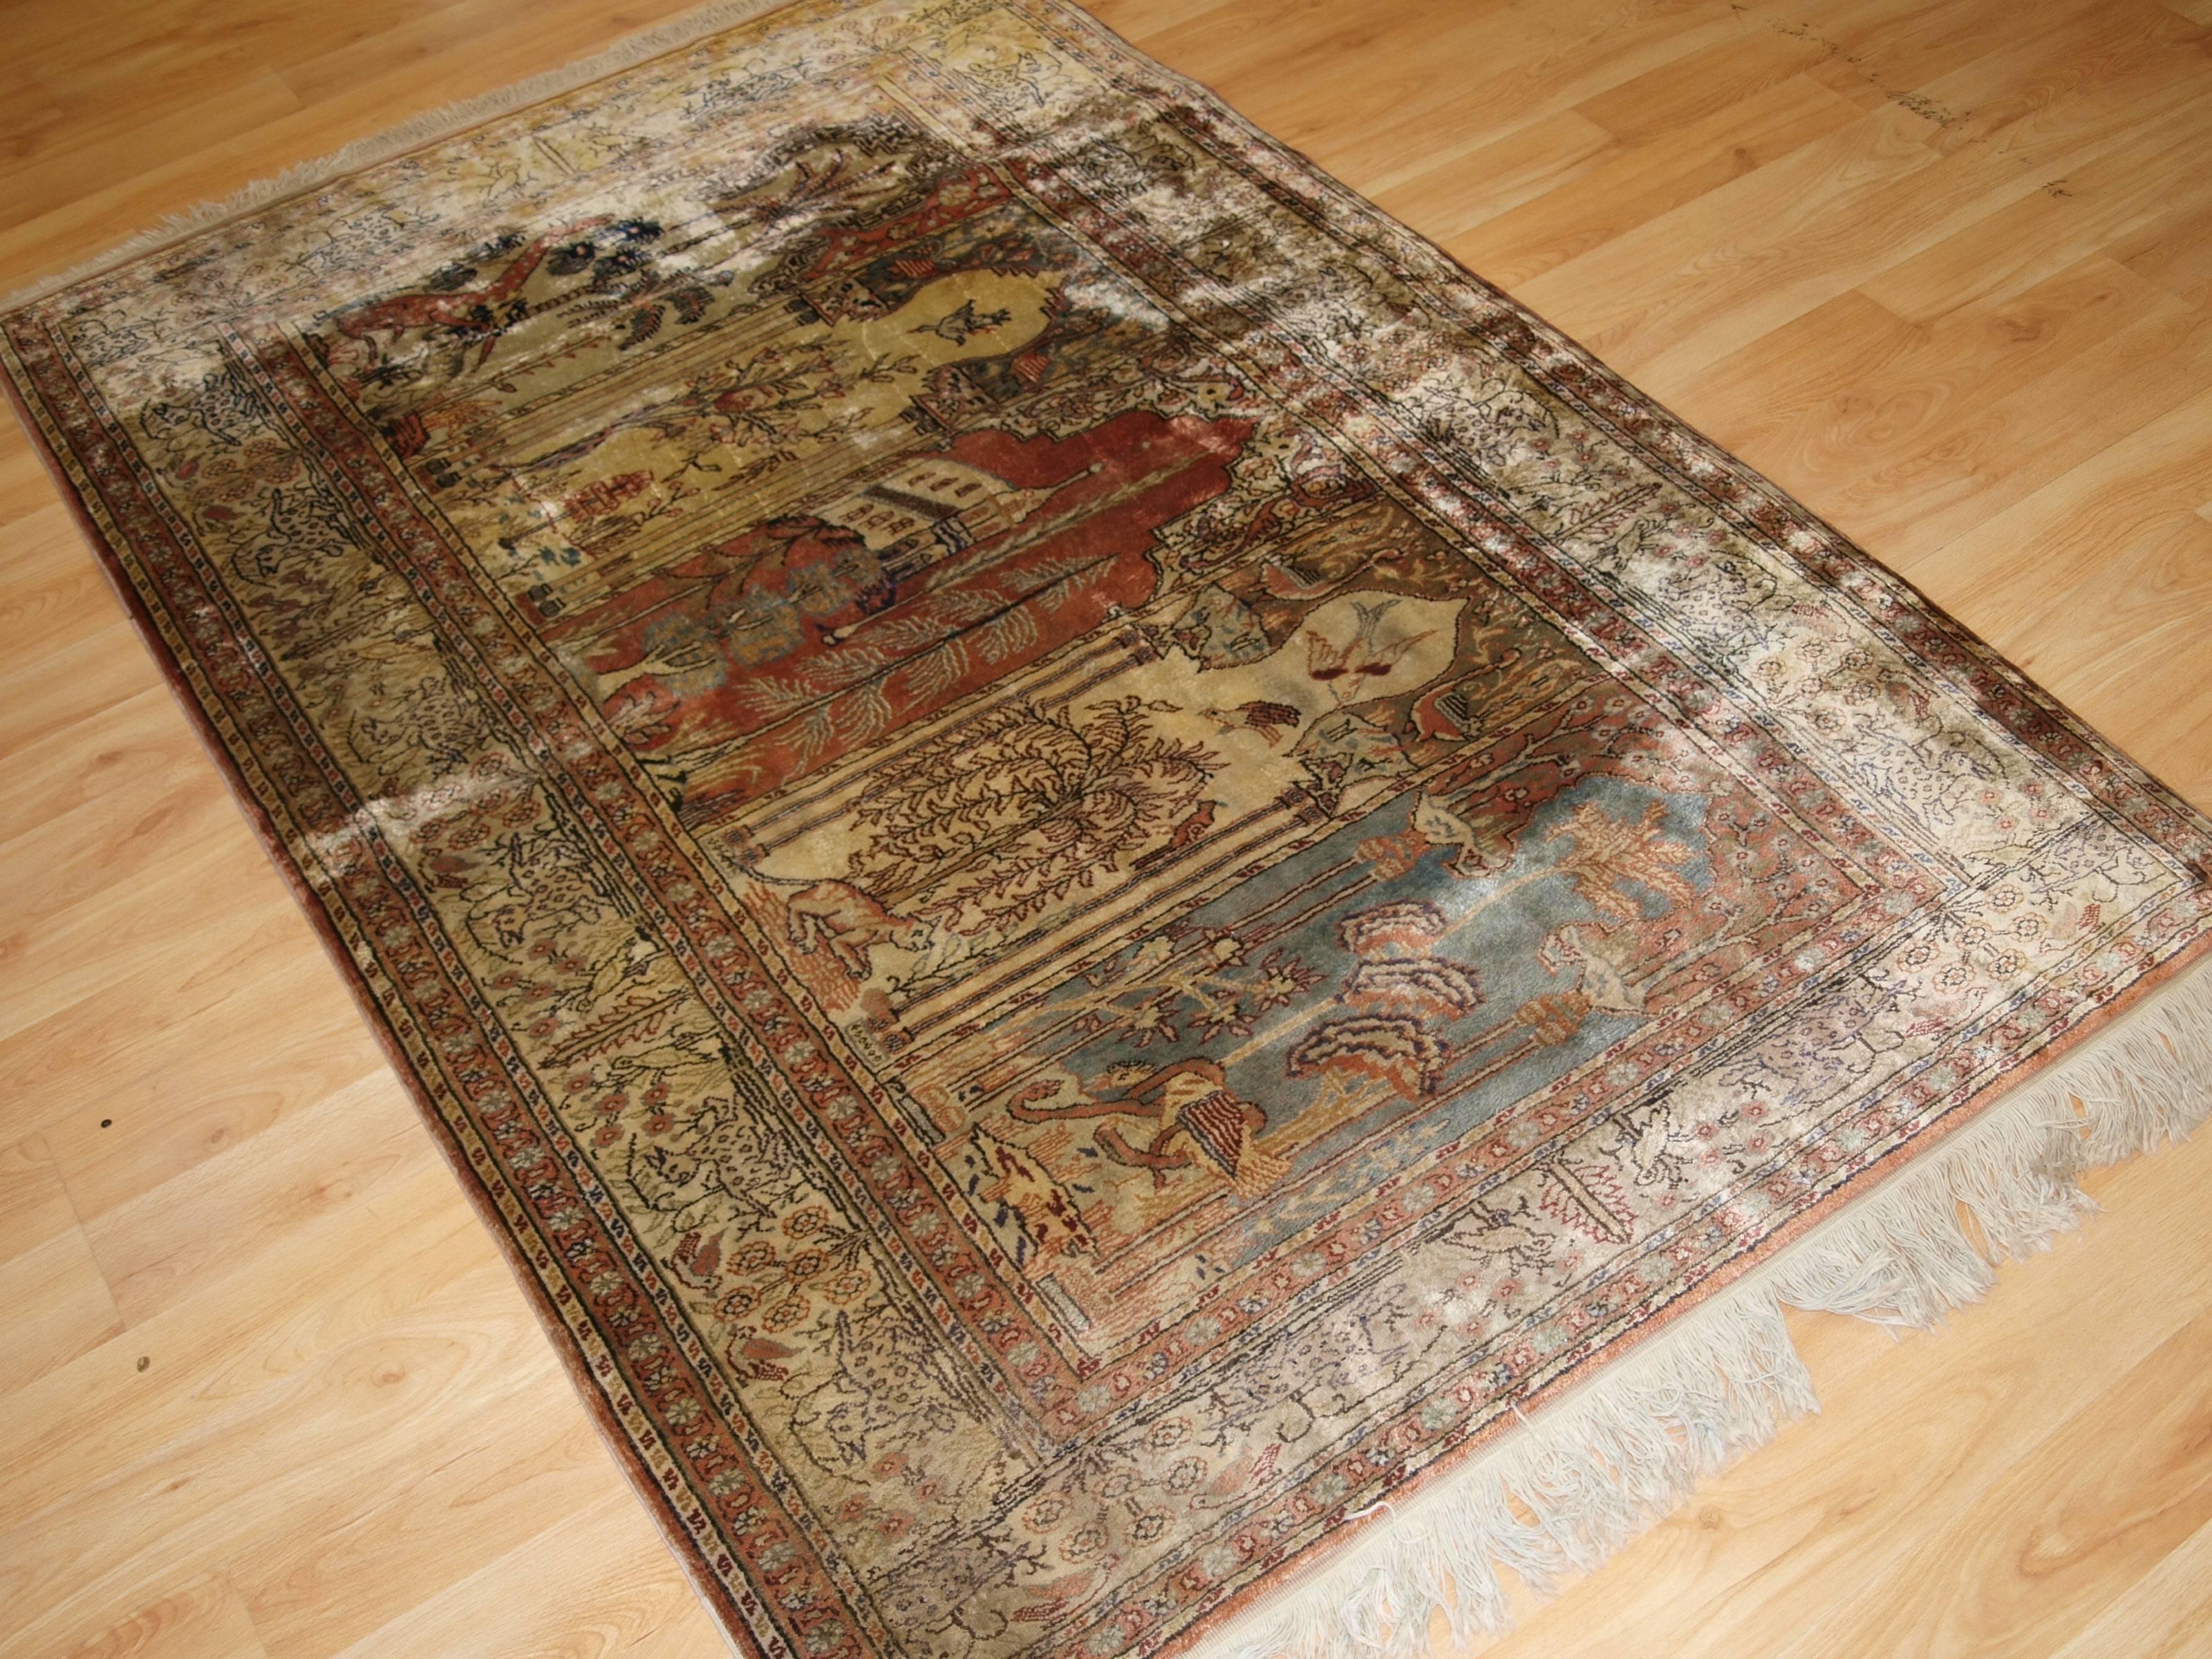 Old Turkish Kayseri 'Art Silk' rug, prayer SAF design, birds and animals, circa 1920.
Size: 5ft 11in x 3ft 11in (180 x 120cm).

Antique Anatolian Kayseri 'art silk' saf prayer rug, beautifully drawn with prayer niches containing trees, birds and